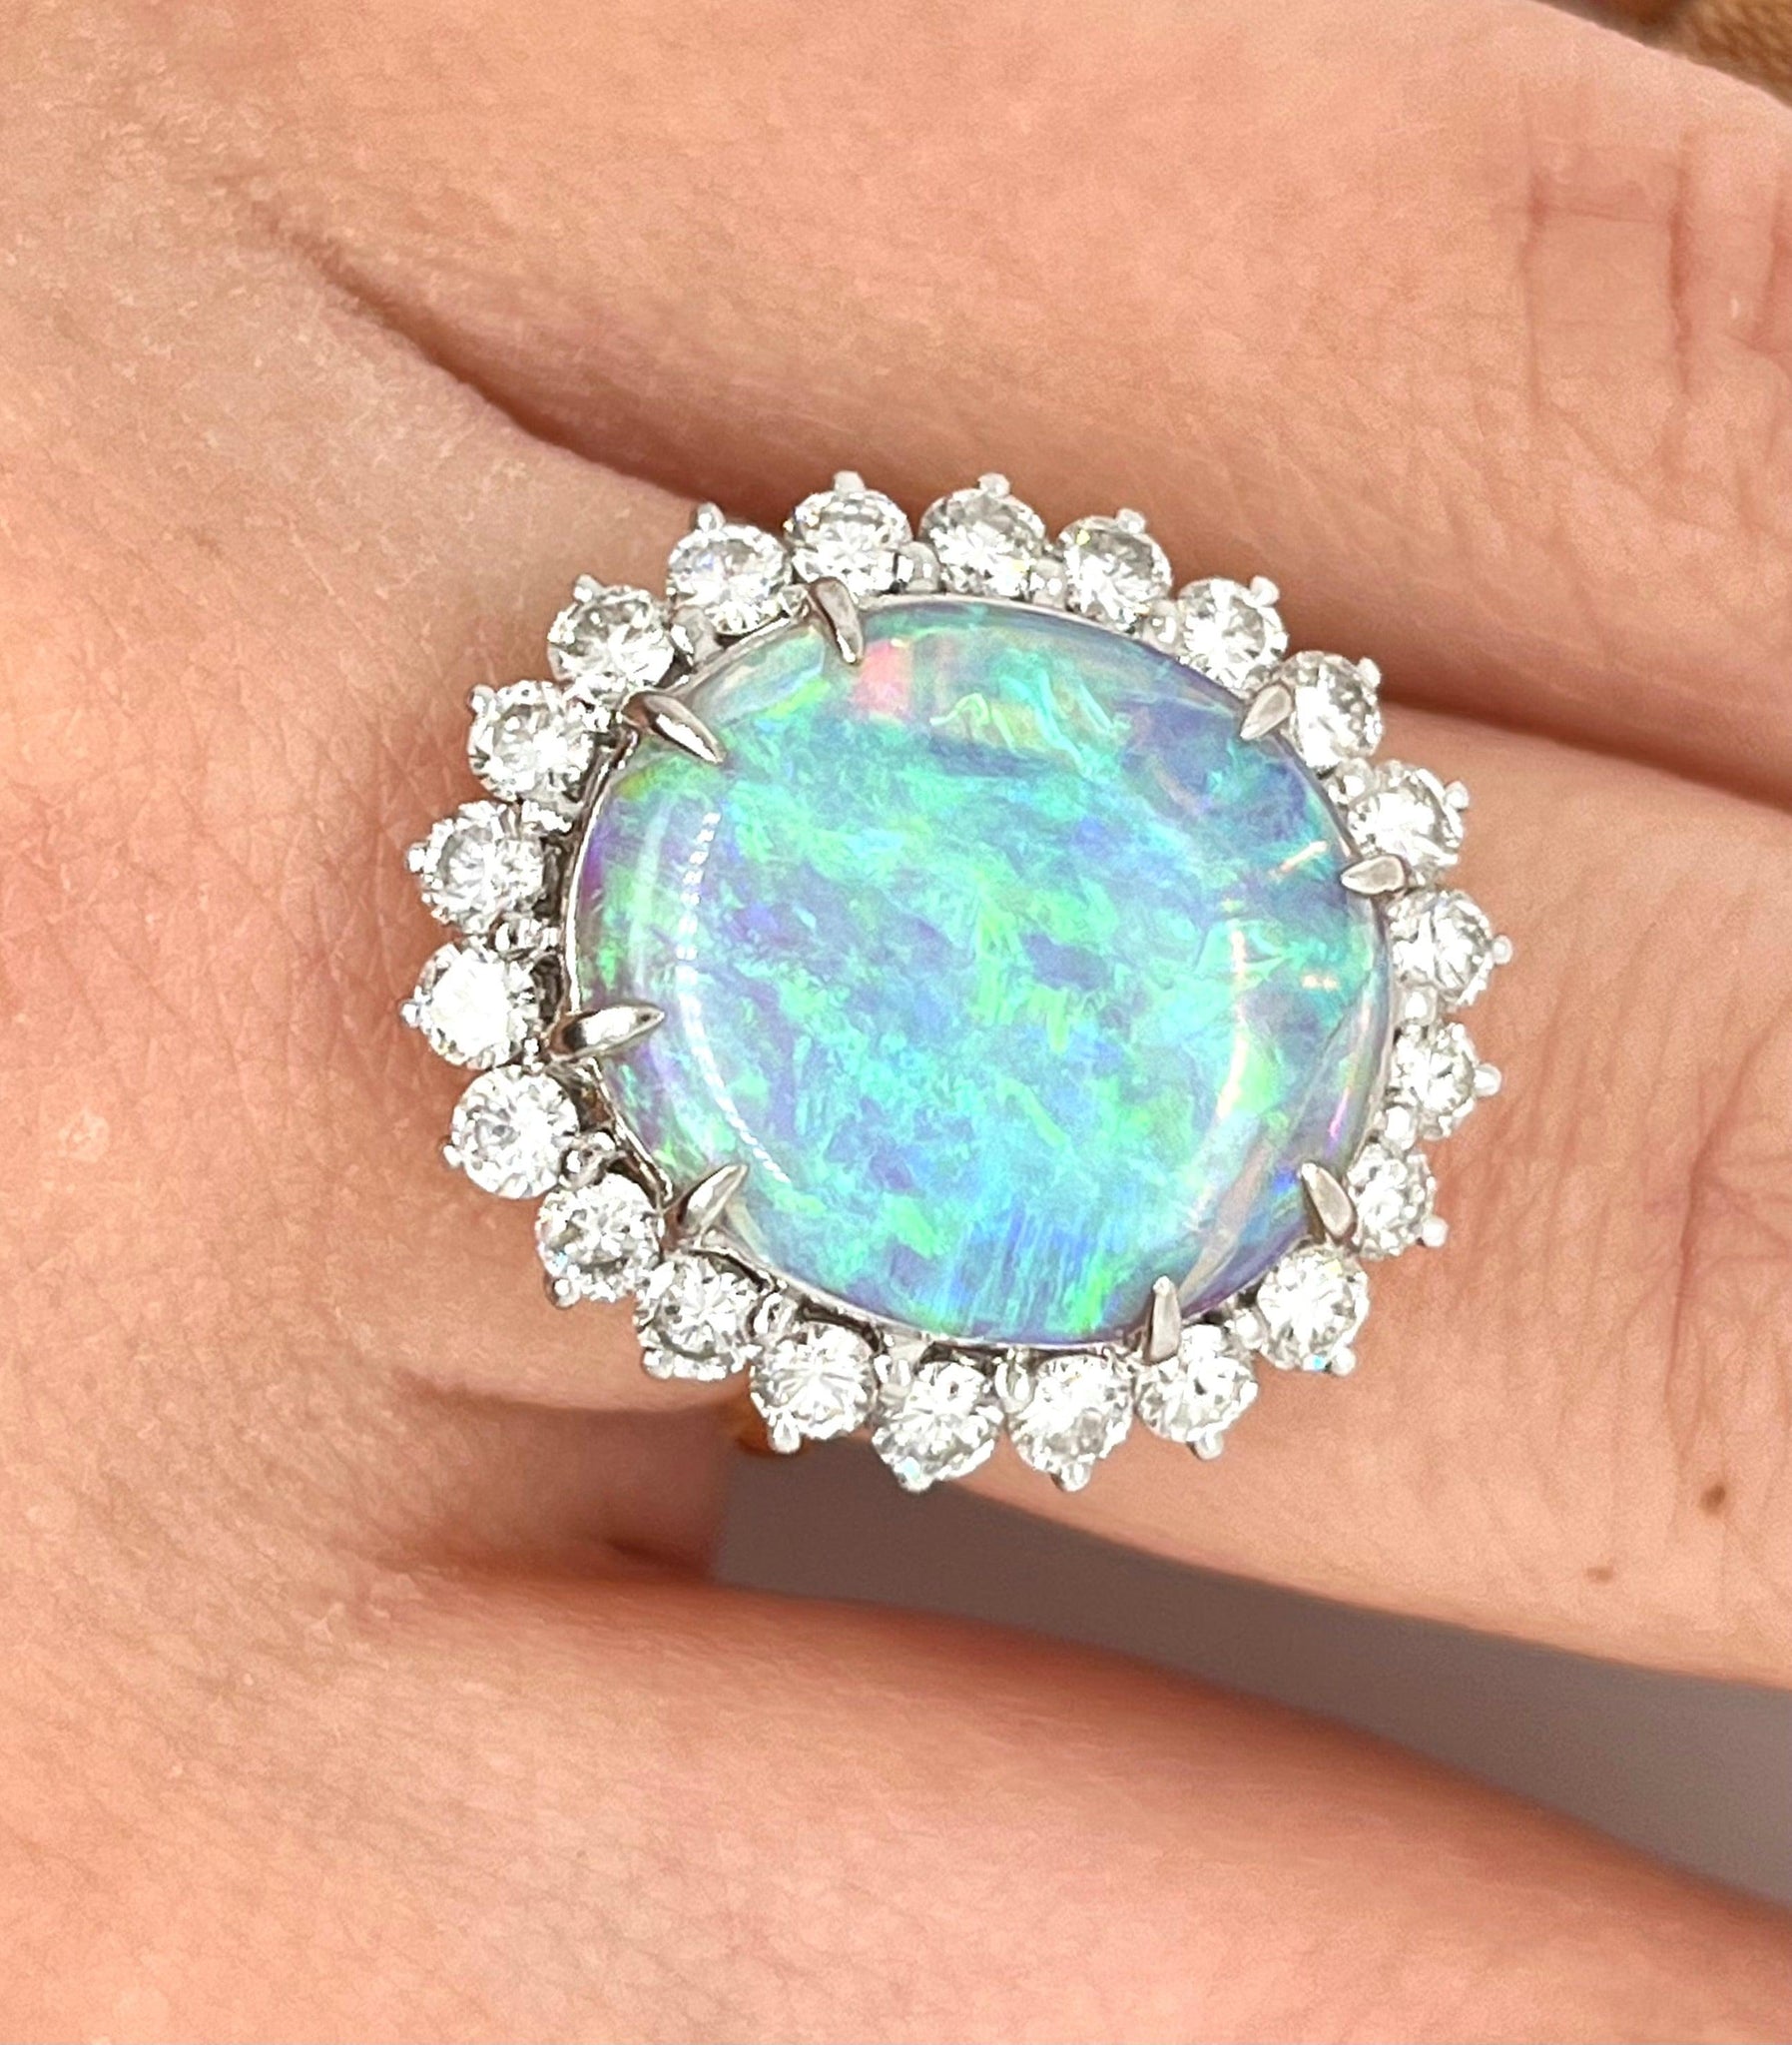 GIA Certified 4.09-carat White Opal and Diamond Halo in Platinum and Gold Ring-Assay Jewelers-ASSAY